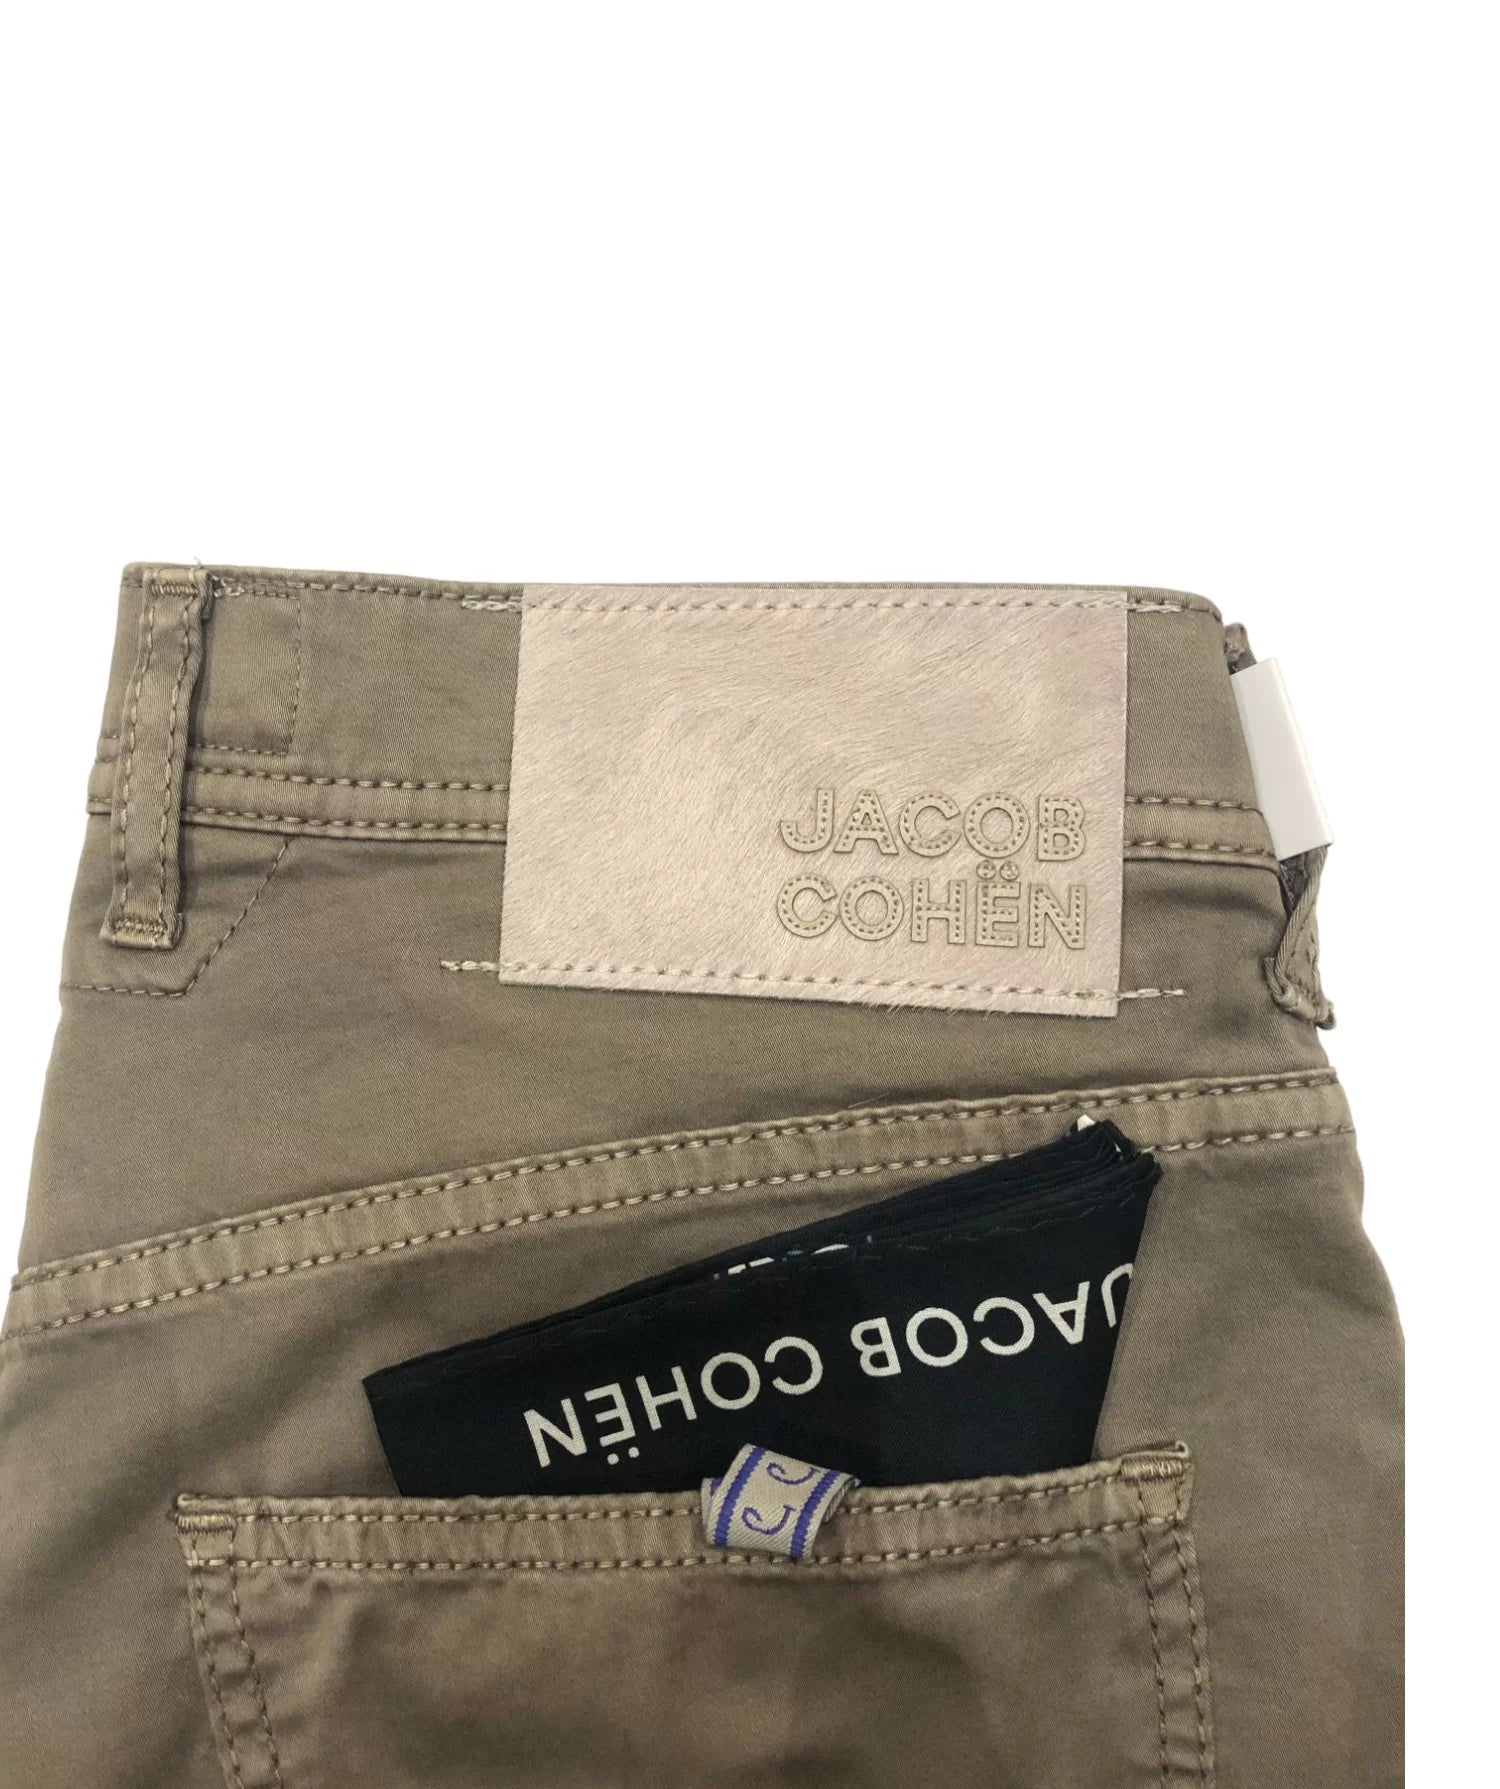 Jacob Cohën Men's Nicolas Shorts in Taupe - Back Logo Patch Close Up